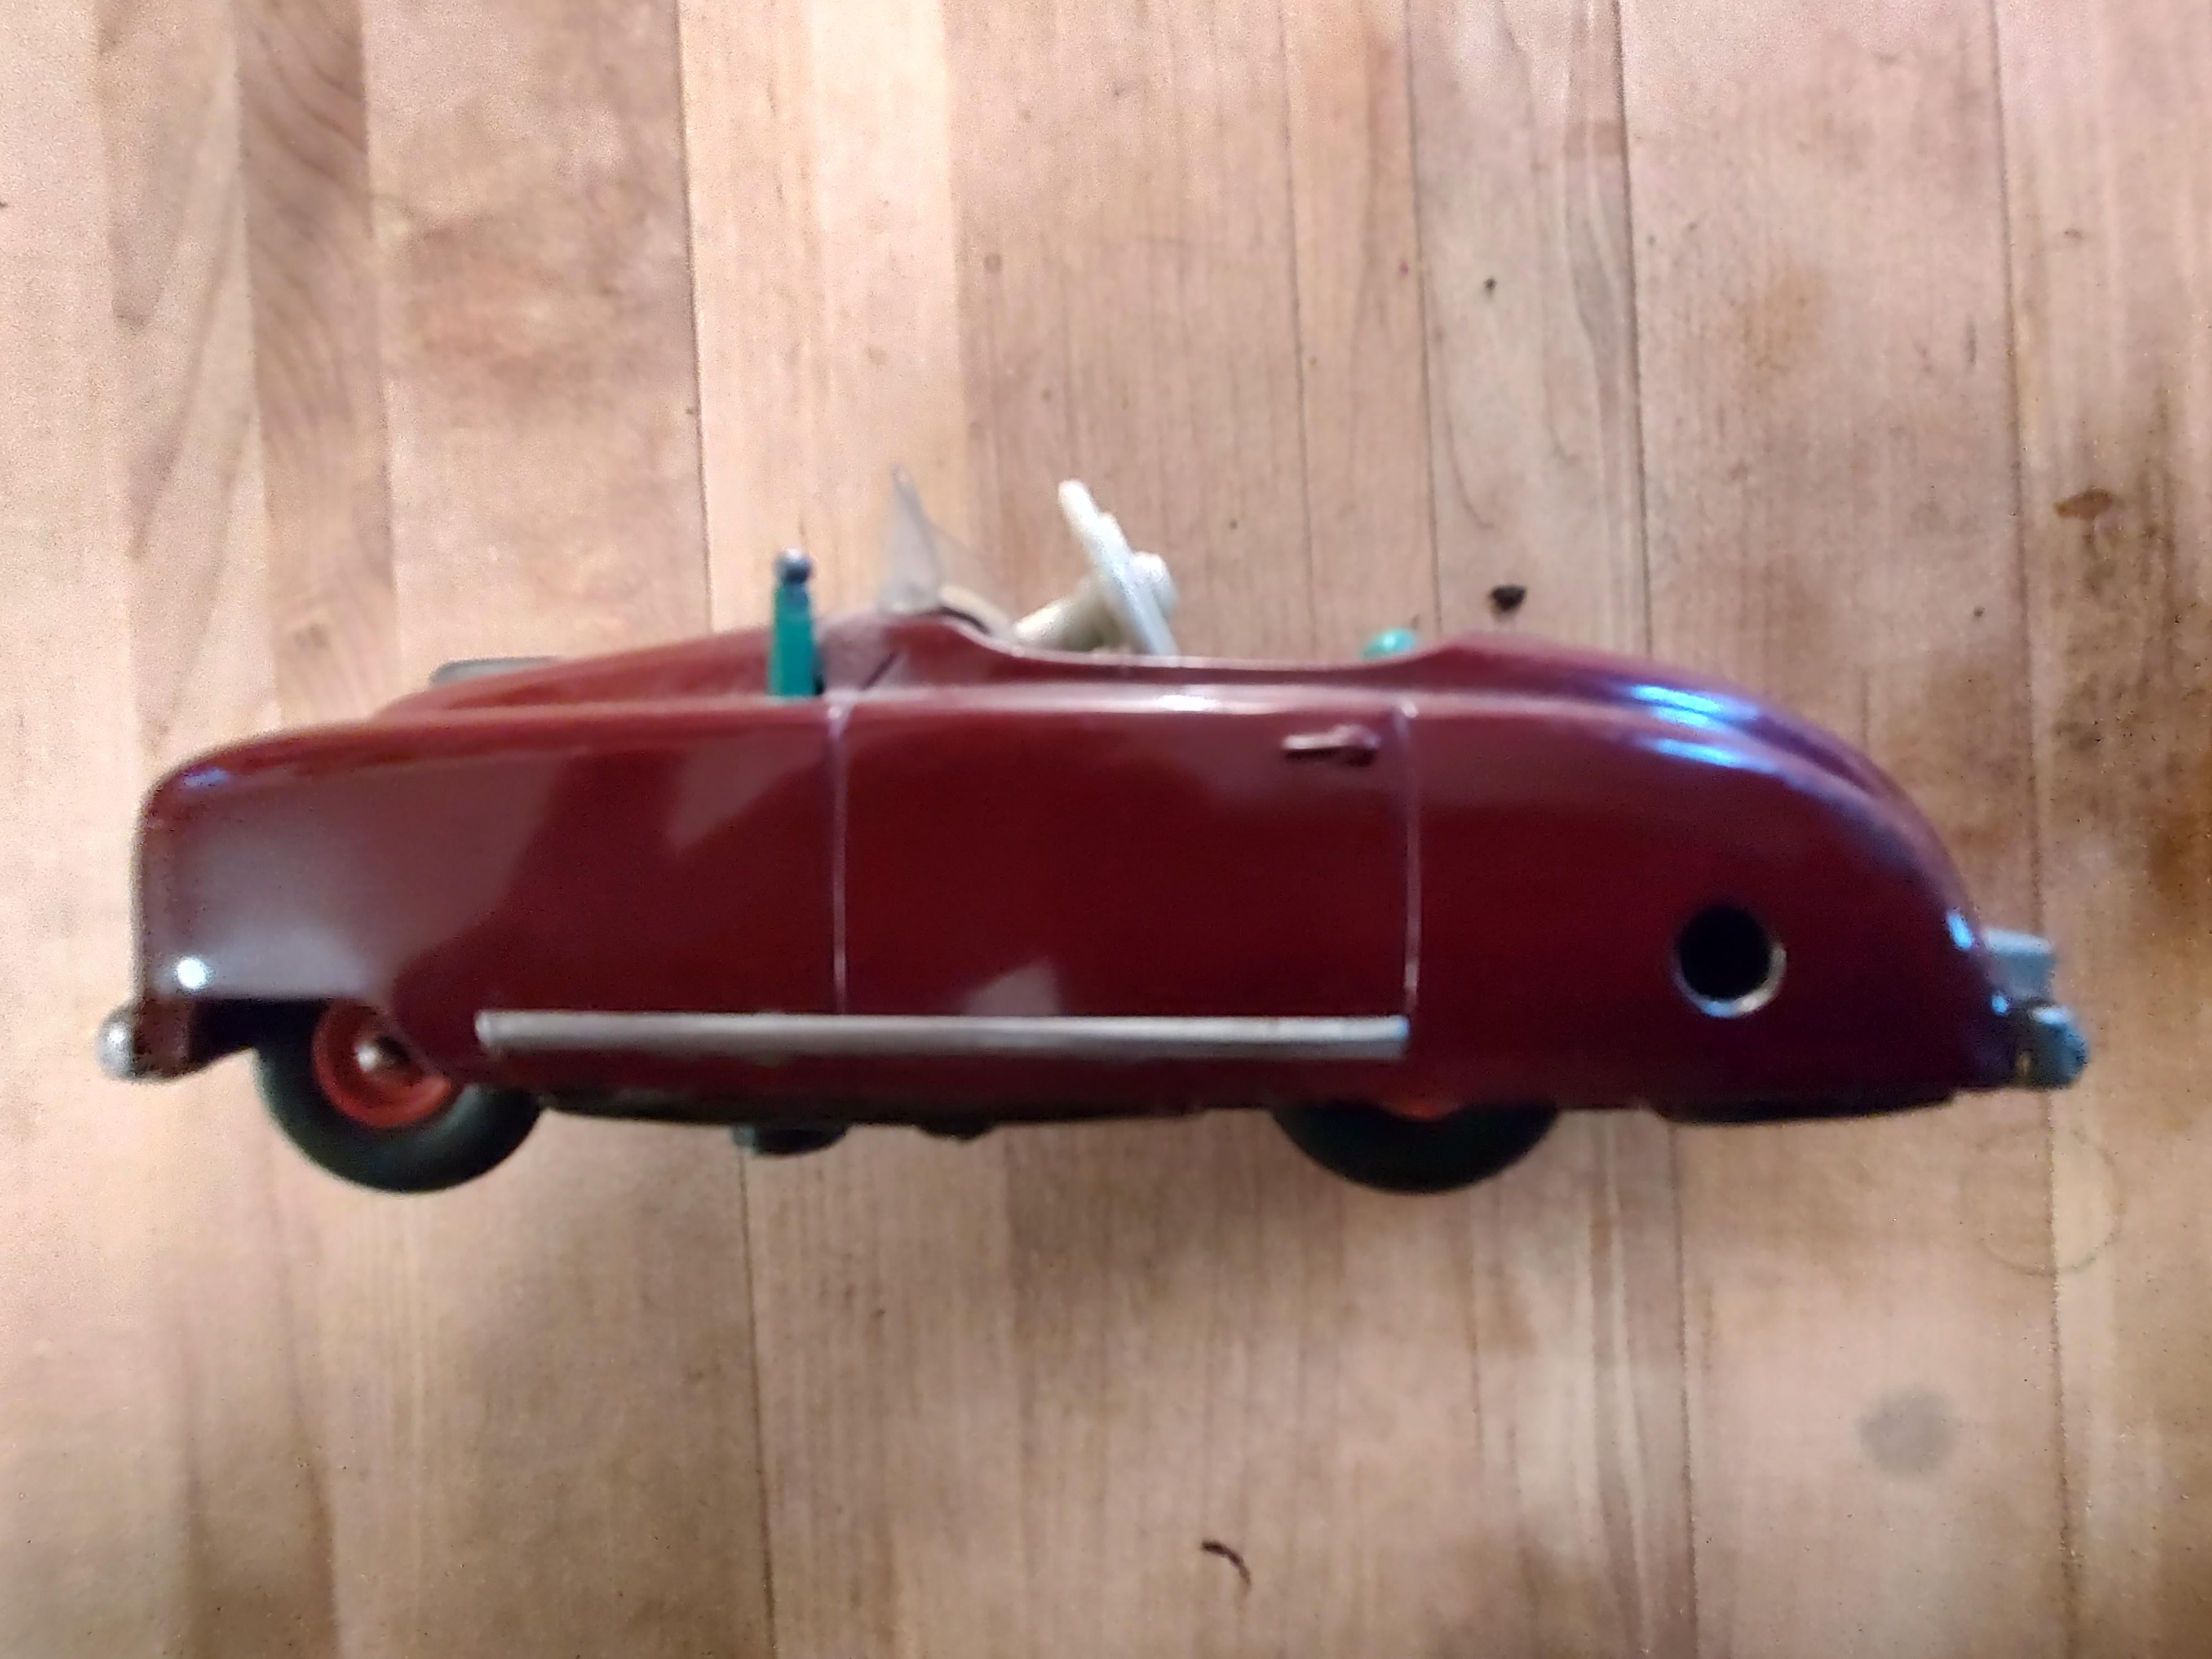 wind up toy car mechanism